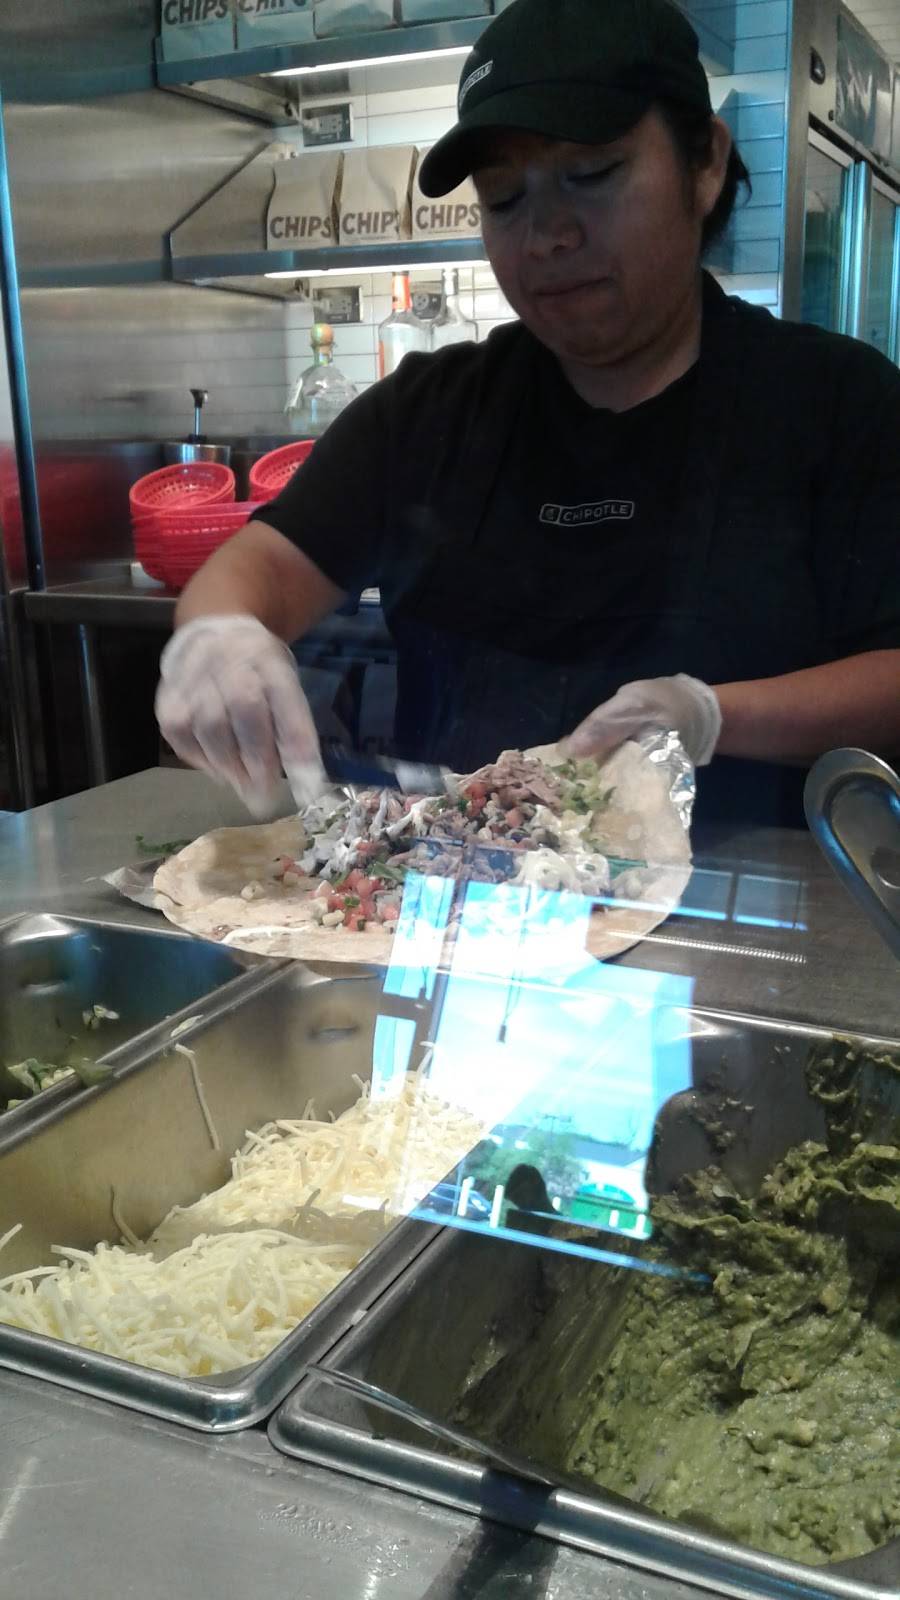 Chipotle Mexican Grill | restaurant | 786 Skokie Blvd, Northbrook, IL 60062, USA | 8475599902 OR +1 847-559-9902